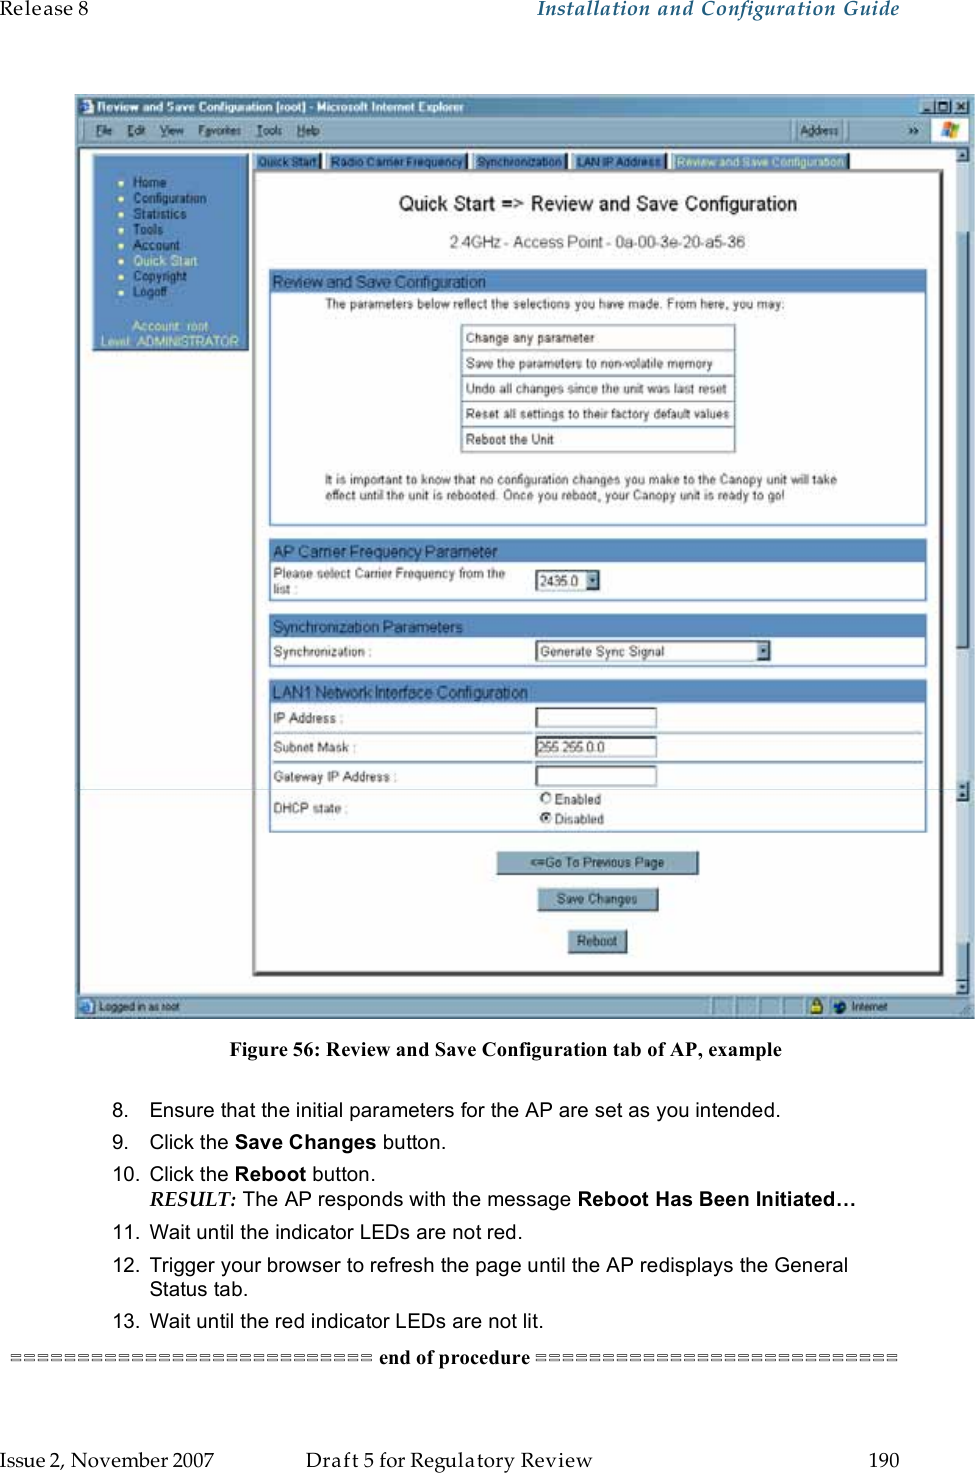 Release 8    Installation and Configuration Guide   Issue 2, November 2007  Draft 5 for Regulatory Review  190       Figure 56: Review and Save Configuration tab of AP, example  8.  Ensure that the initial parameters for the AP are set as you intended. 9.  Click the Save Changes button. 10.  Click the Reboot button. RESULT: The AP responds with the message Reboot Has Been Initiated… 11.  Wait until the indicator LEDs are not red. 12.  Trigger your browser to refresh the page until the AP redisplays the General Status tab.  13.  Wait until the red indicator LEDs are not lit. =========================== end of procedure ===========================  